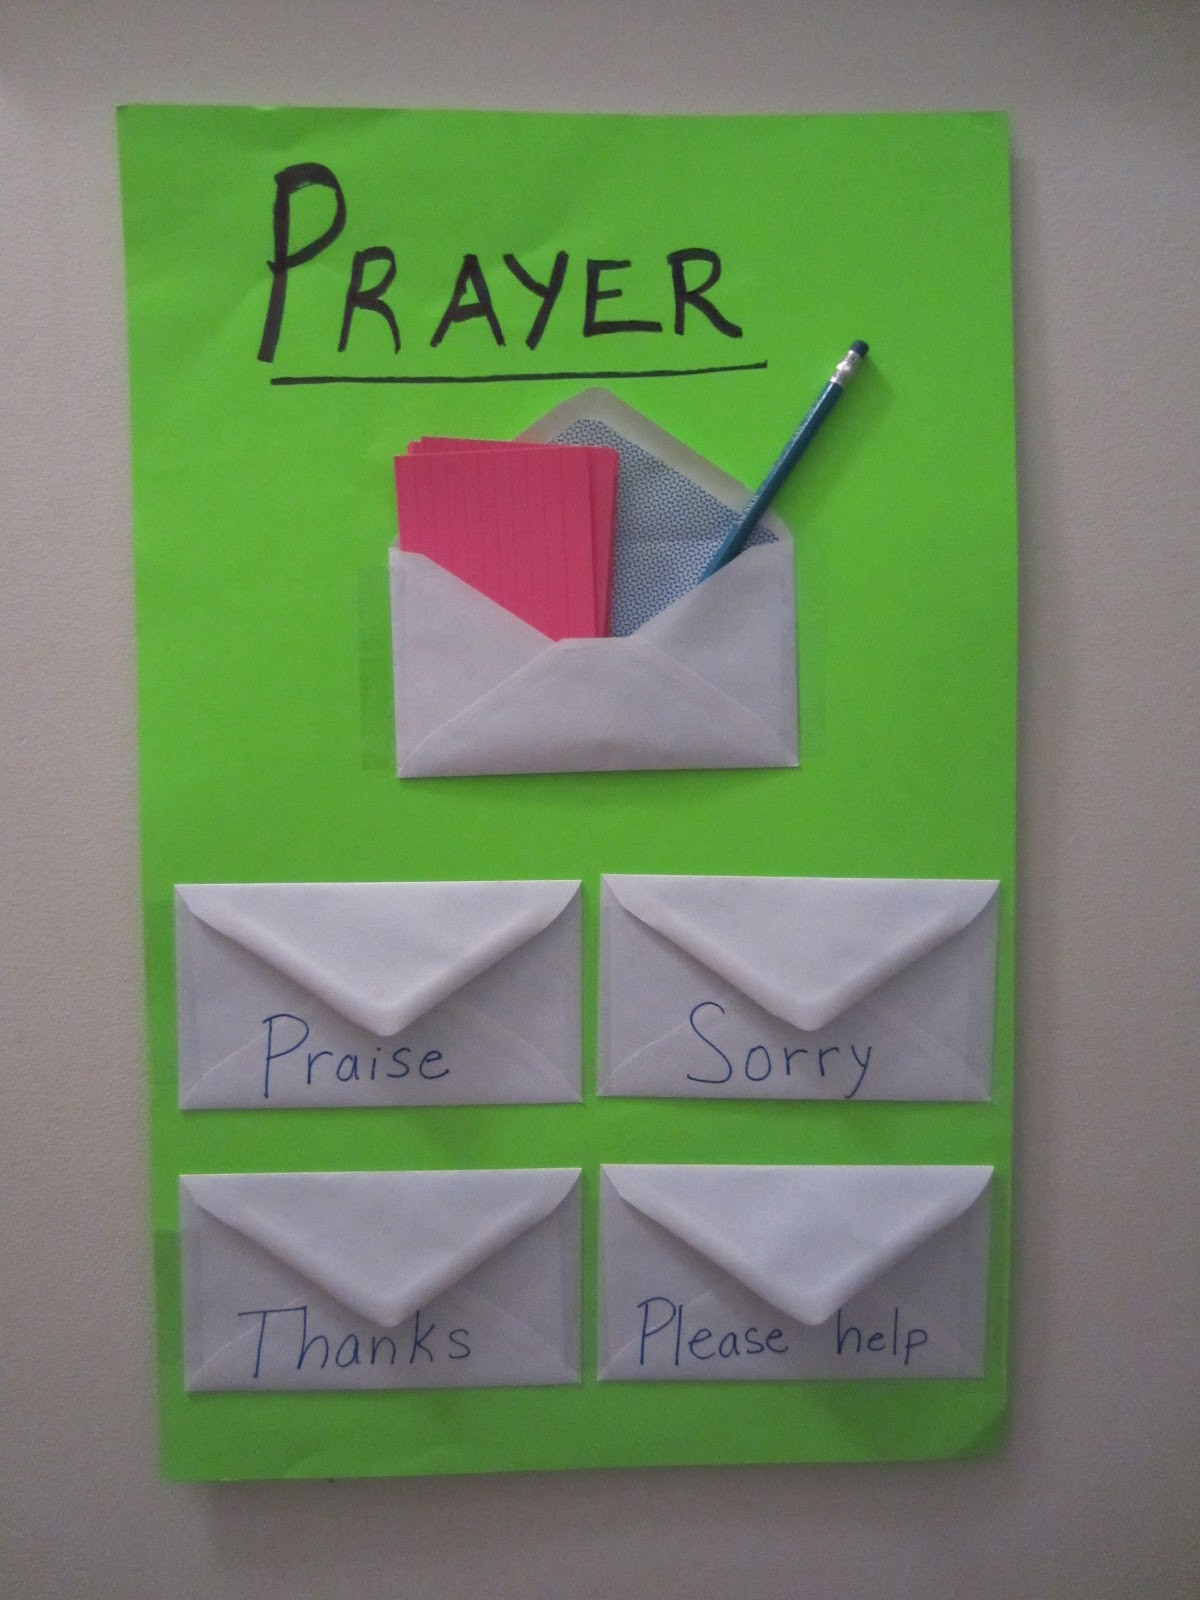 Prayer Crafts For Kids
 Turning Our Hearts Teaching Our Children to Pray